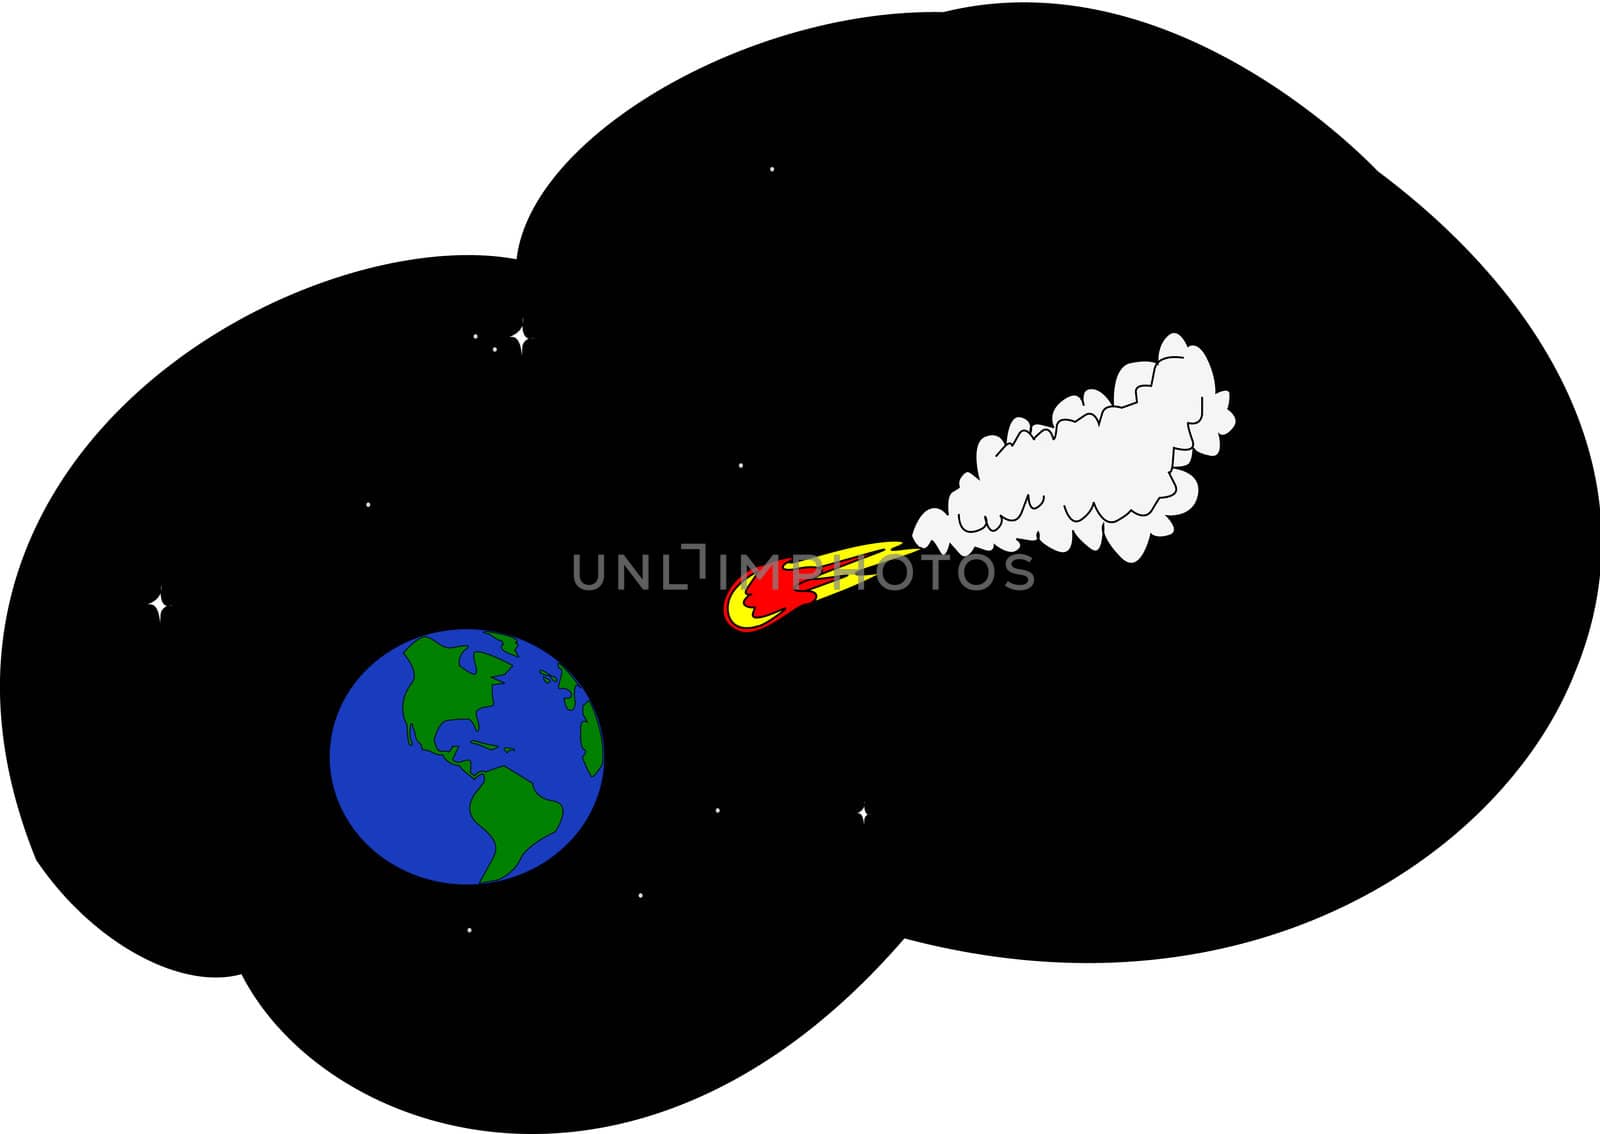 Asteroid in space travels in the direction of the Earth.